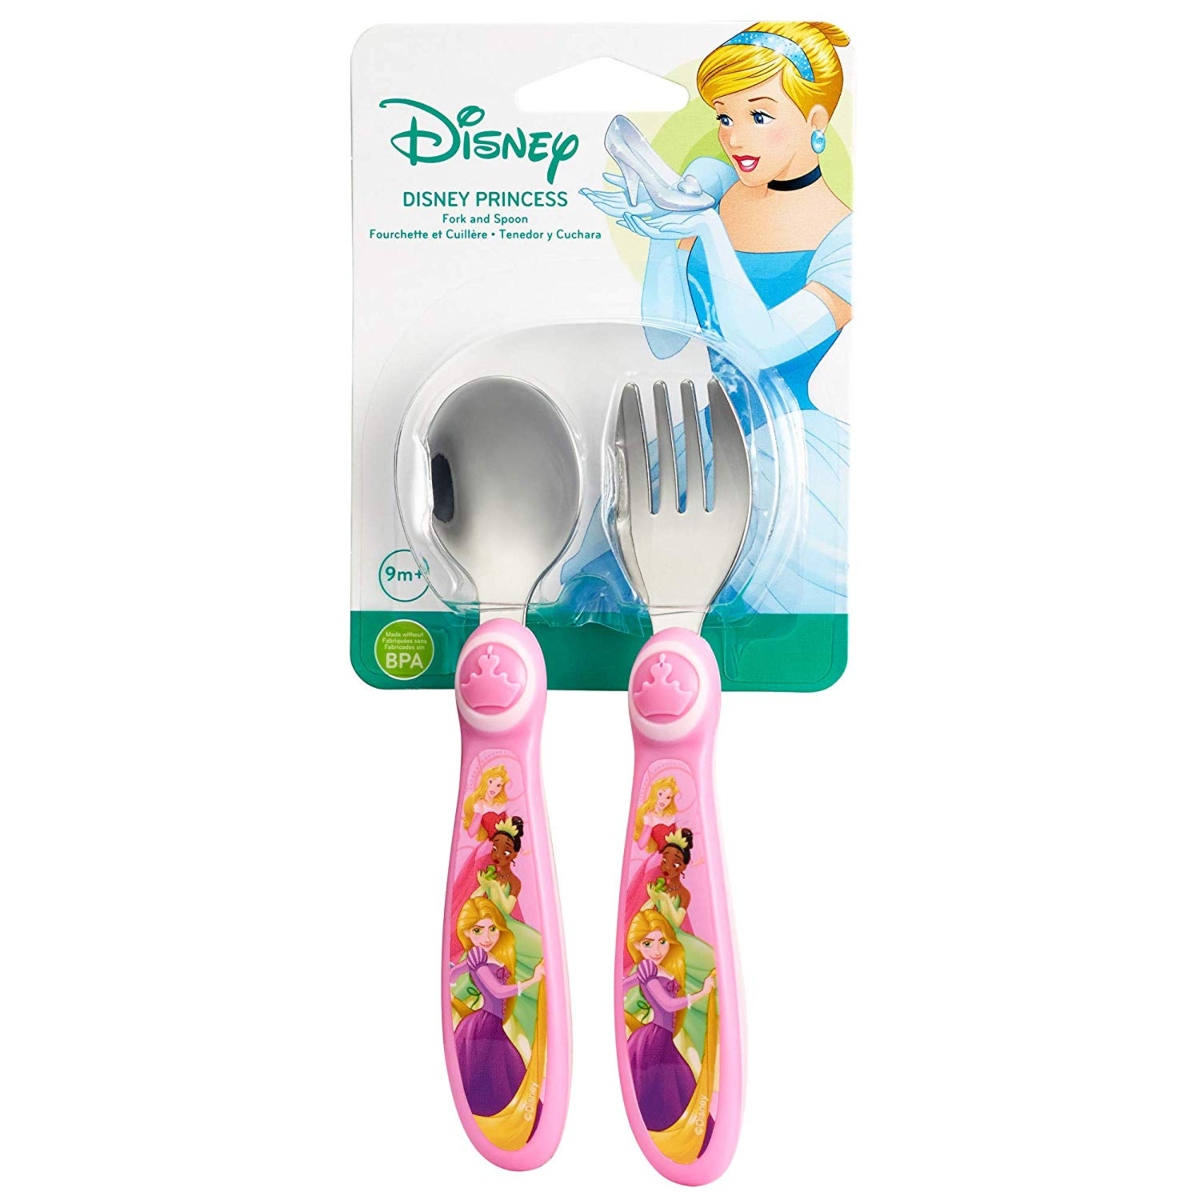 Disney princess fork and spoon set in Disney Princess Packaging, with an image of Cinderella.